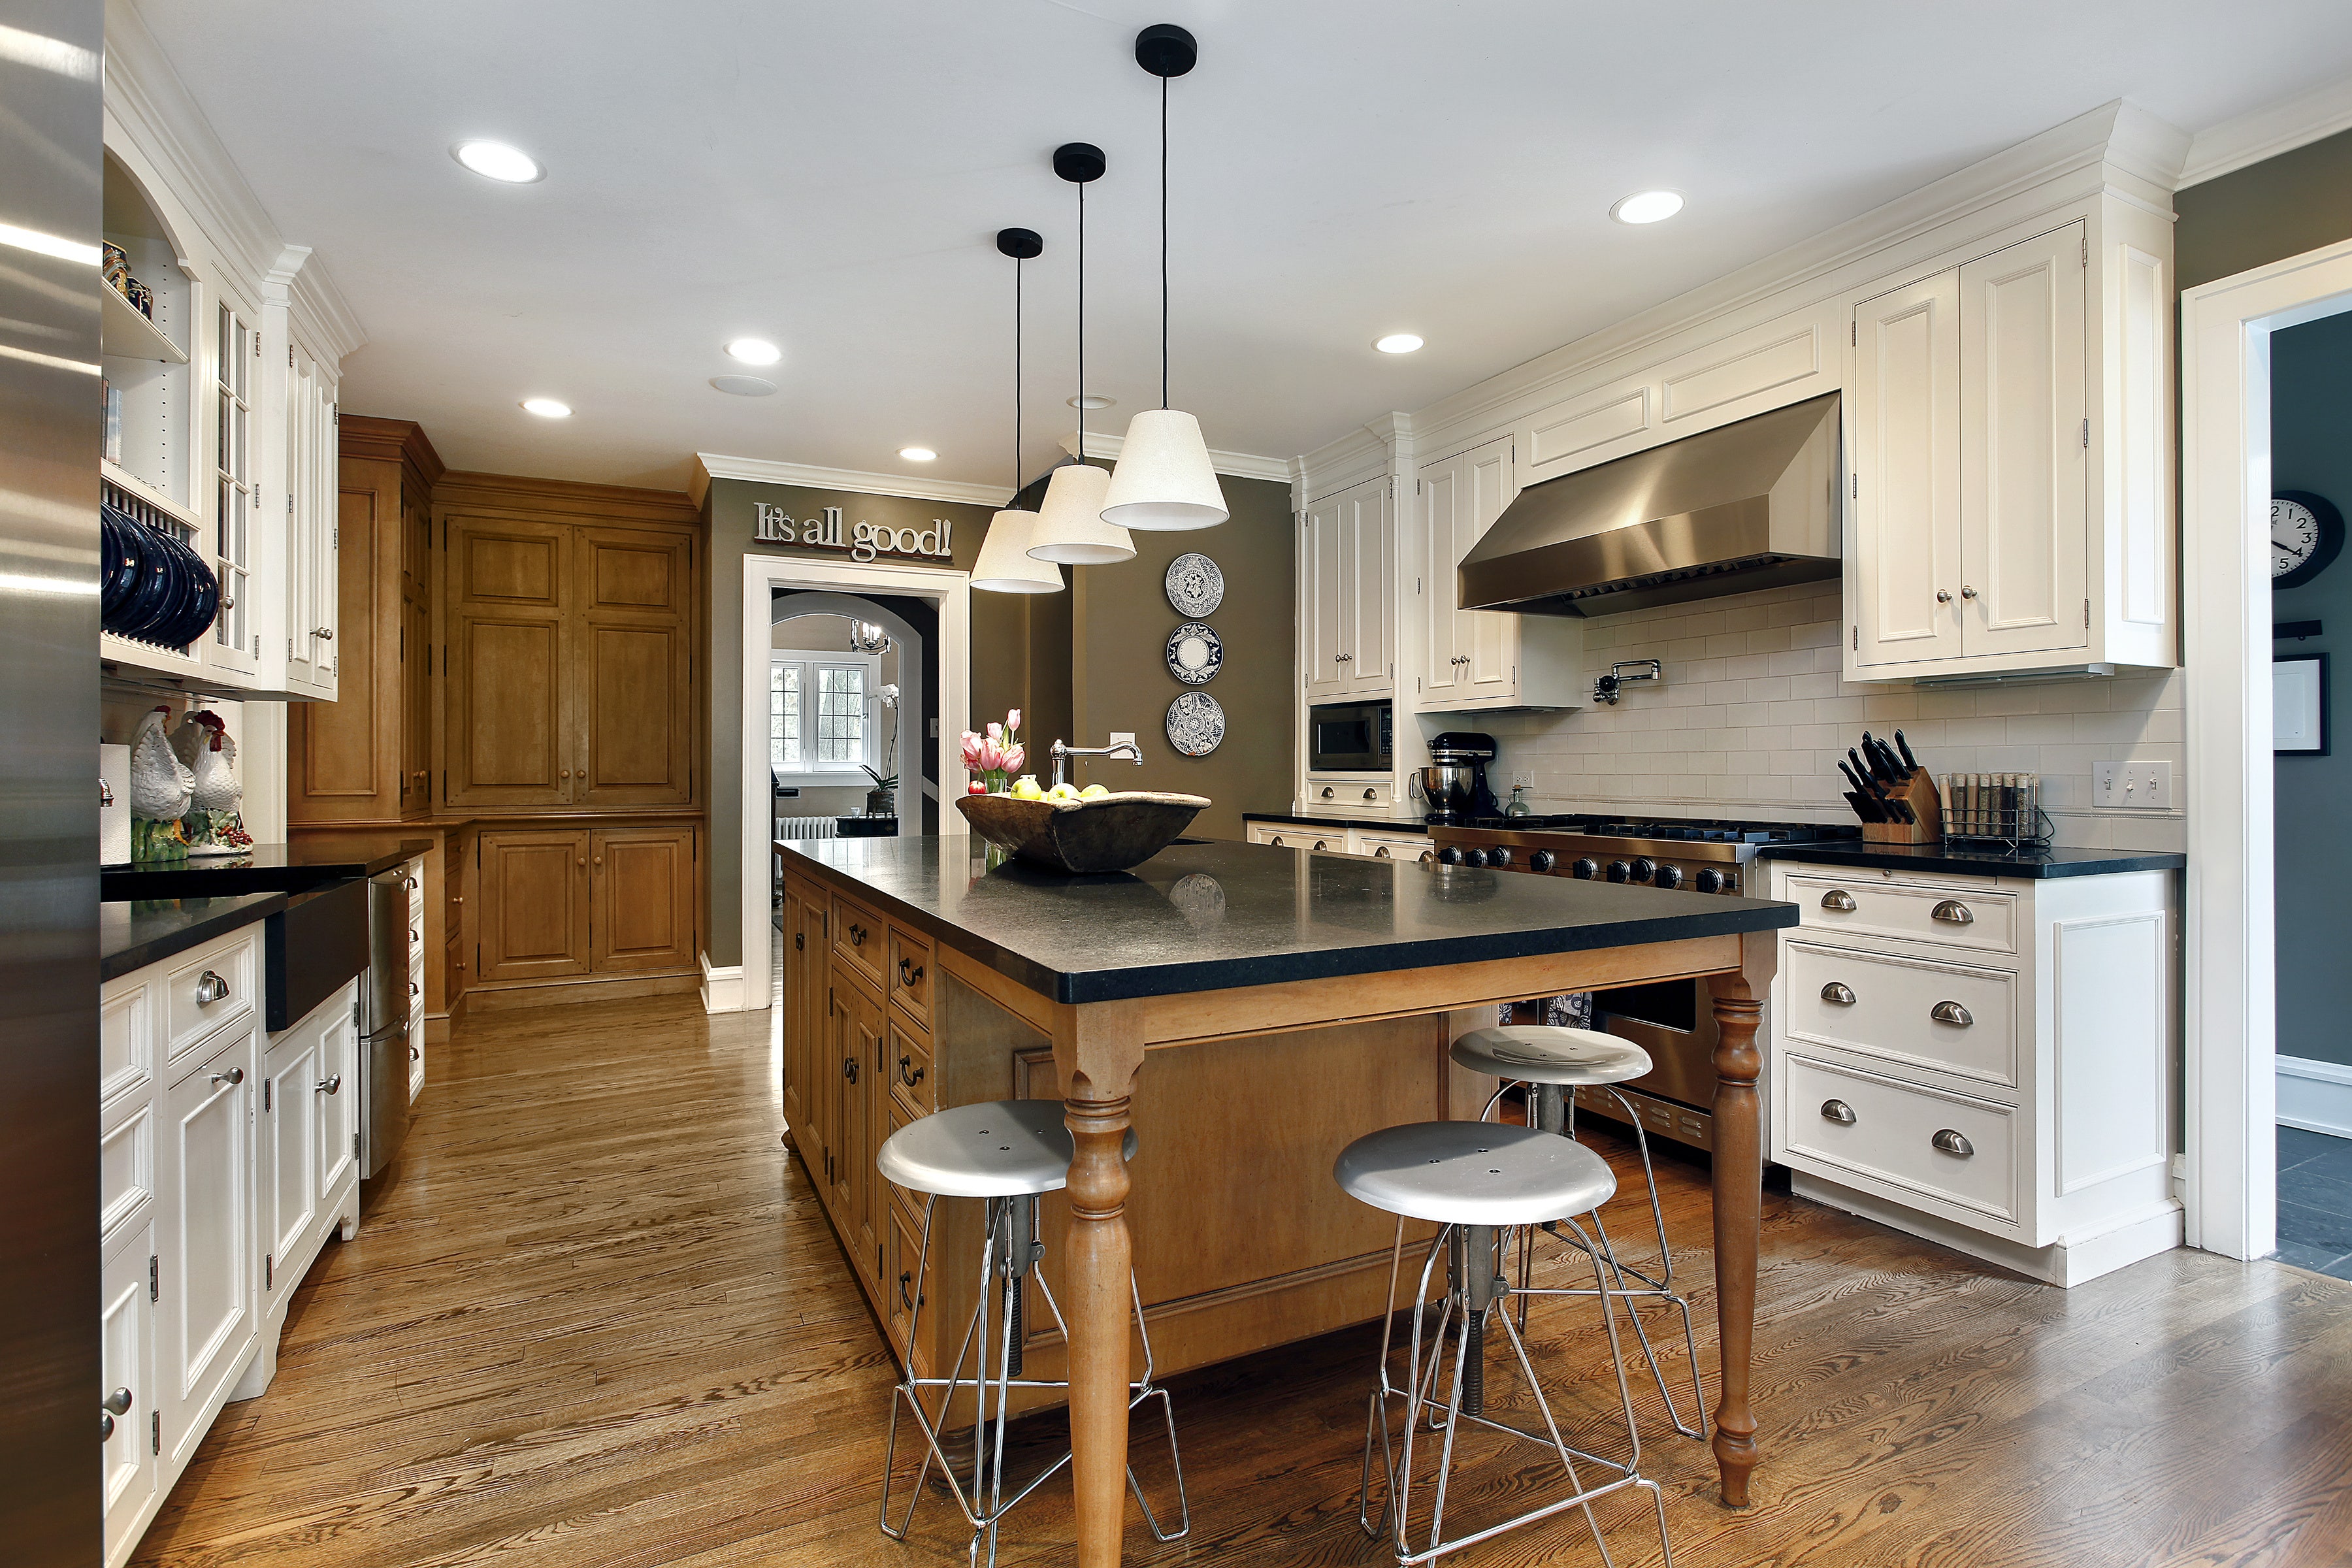 6 Benefits of Stainless Steel Appliances for Your Kitchen